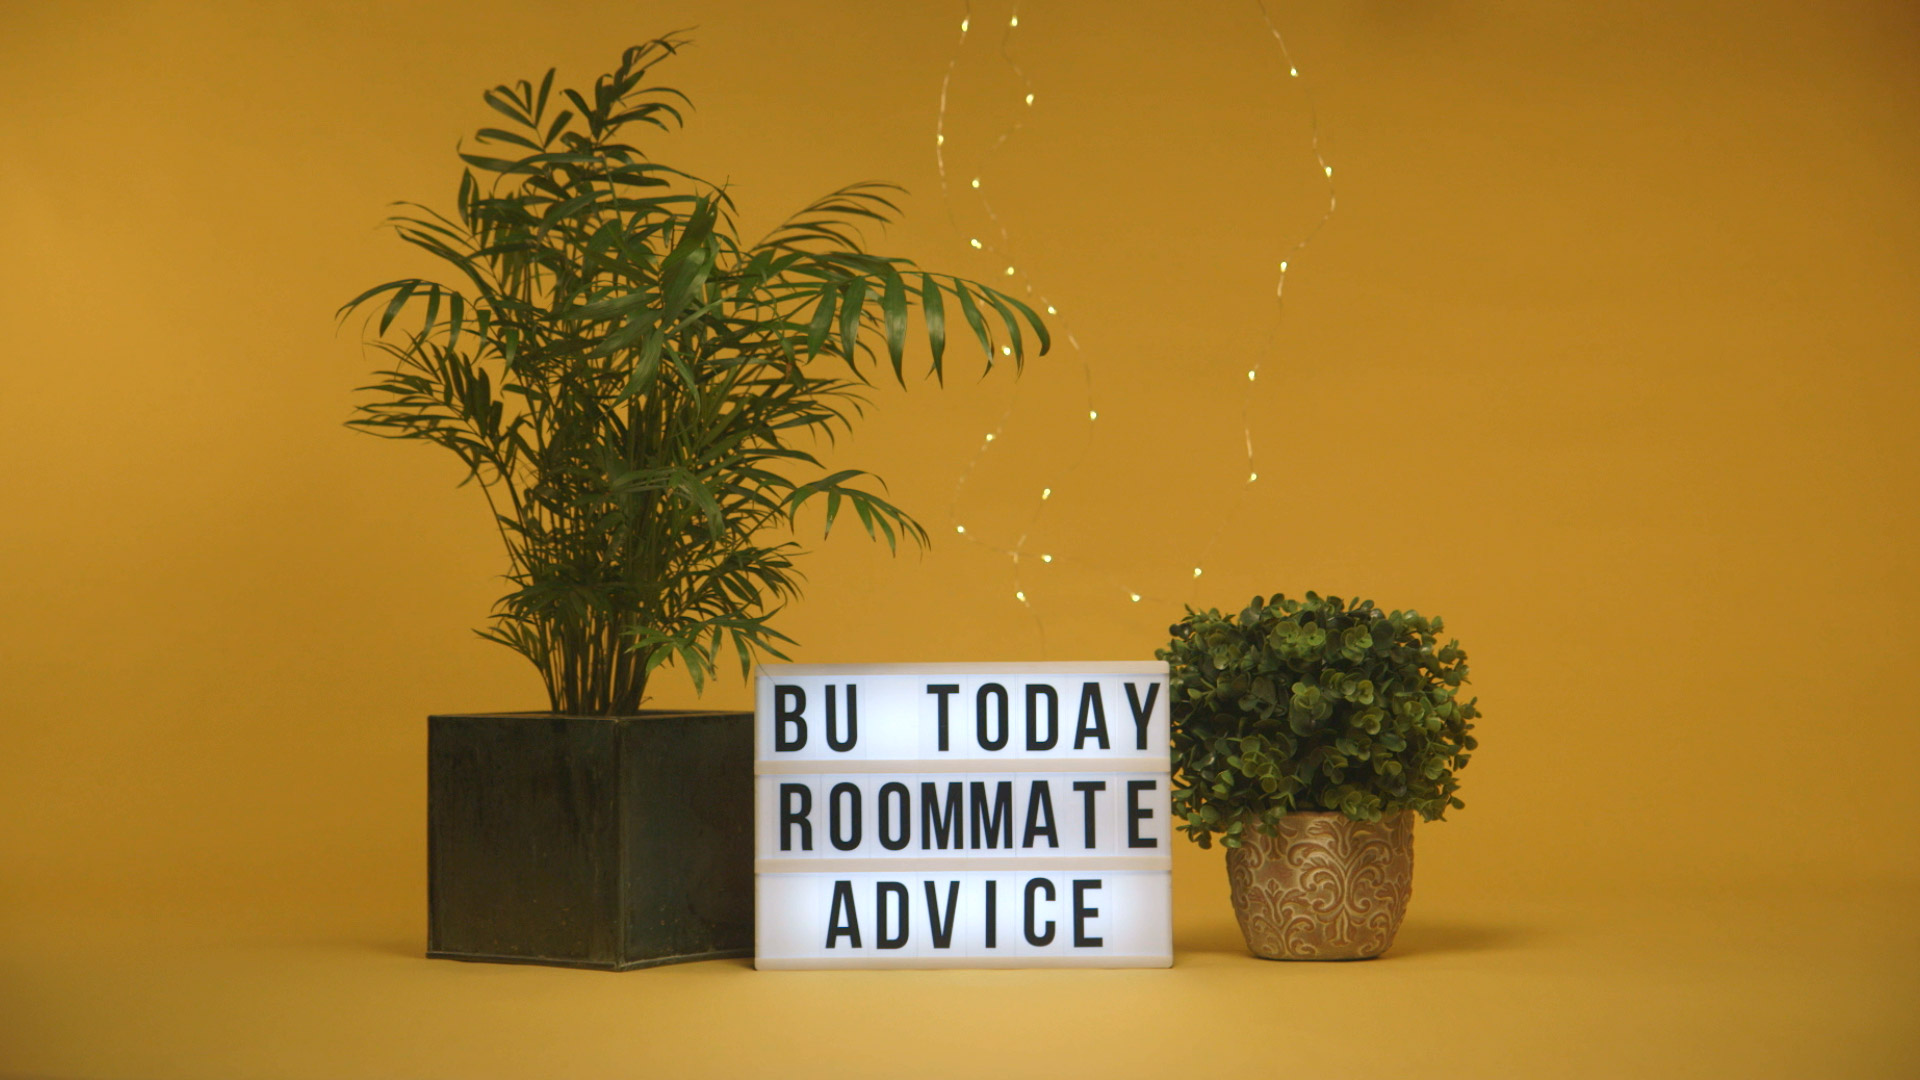 Two house plants on either side of a lightbox sign that says 'BU Today Roommate Advice'